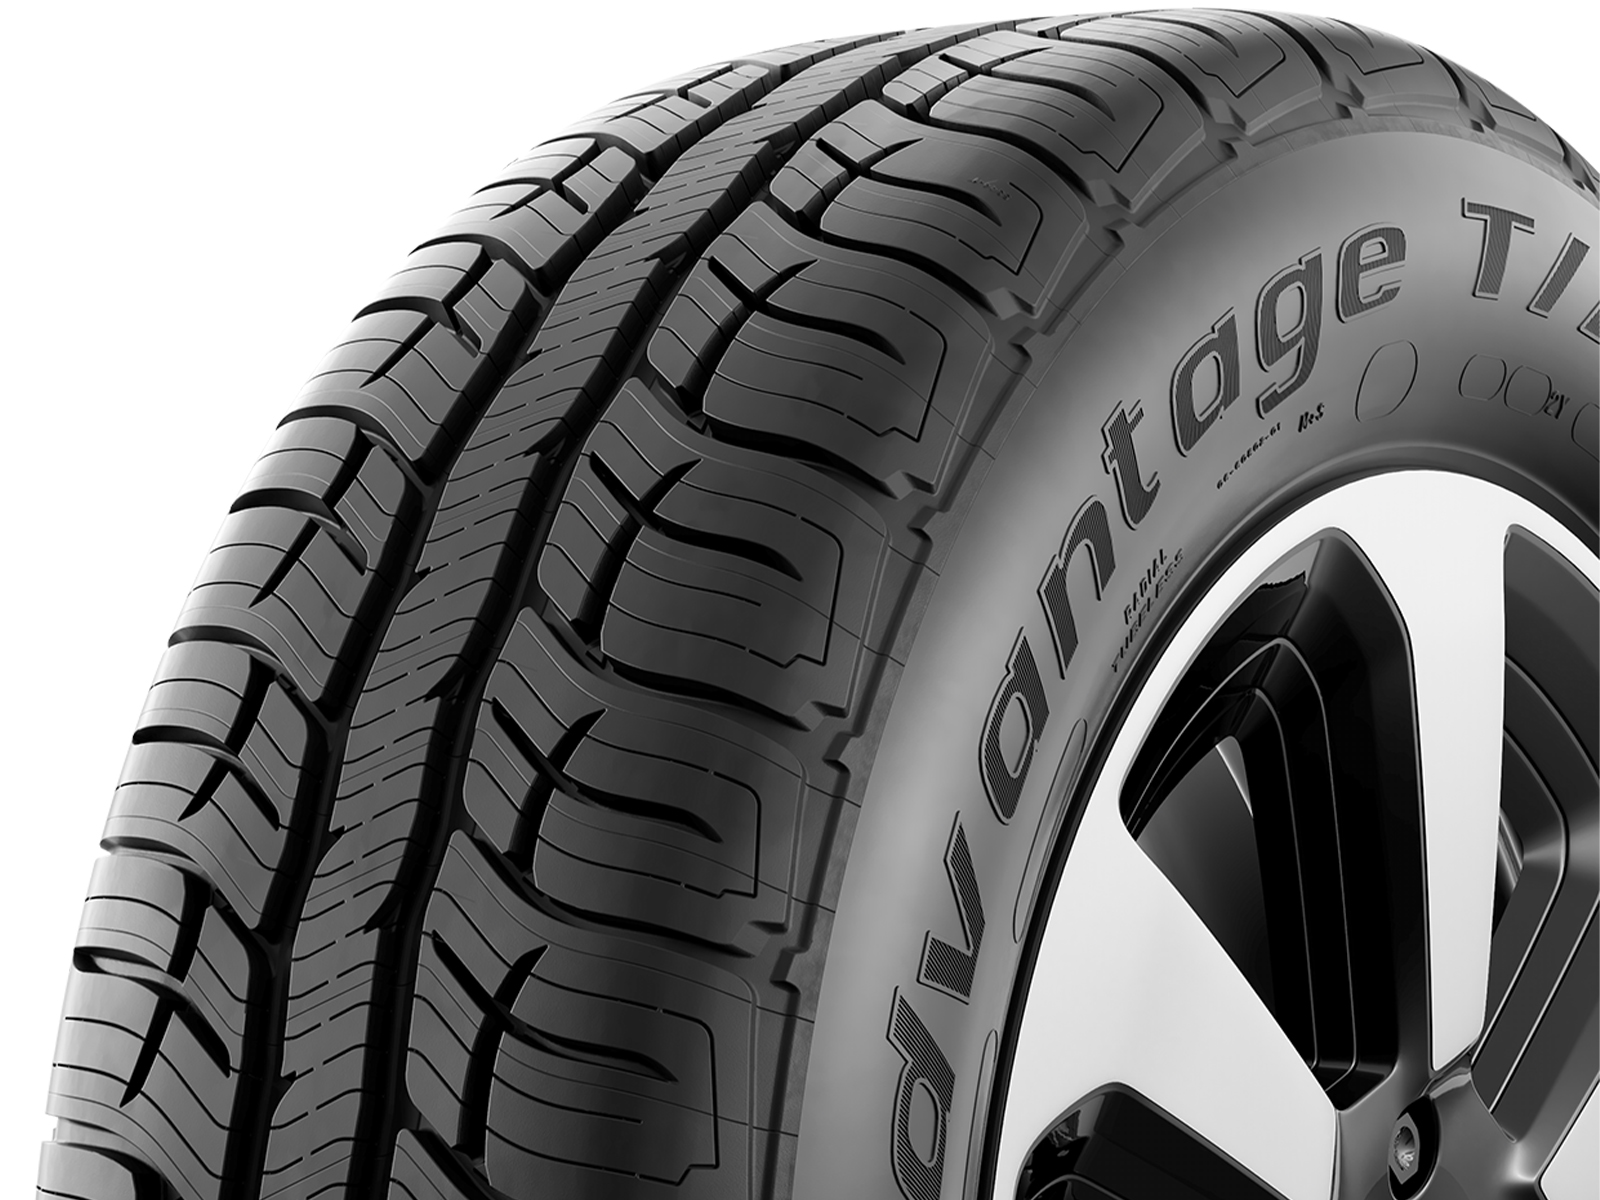 Anyone try out the BFG Advantage T/A Sport LT tires yet?